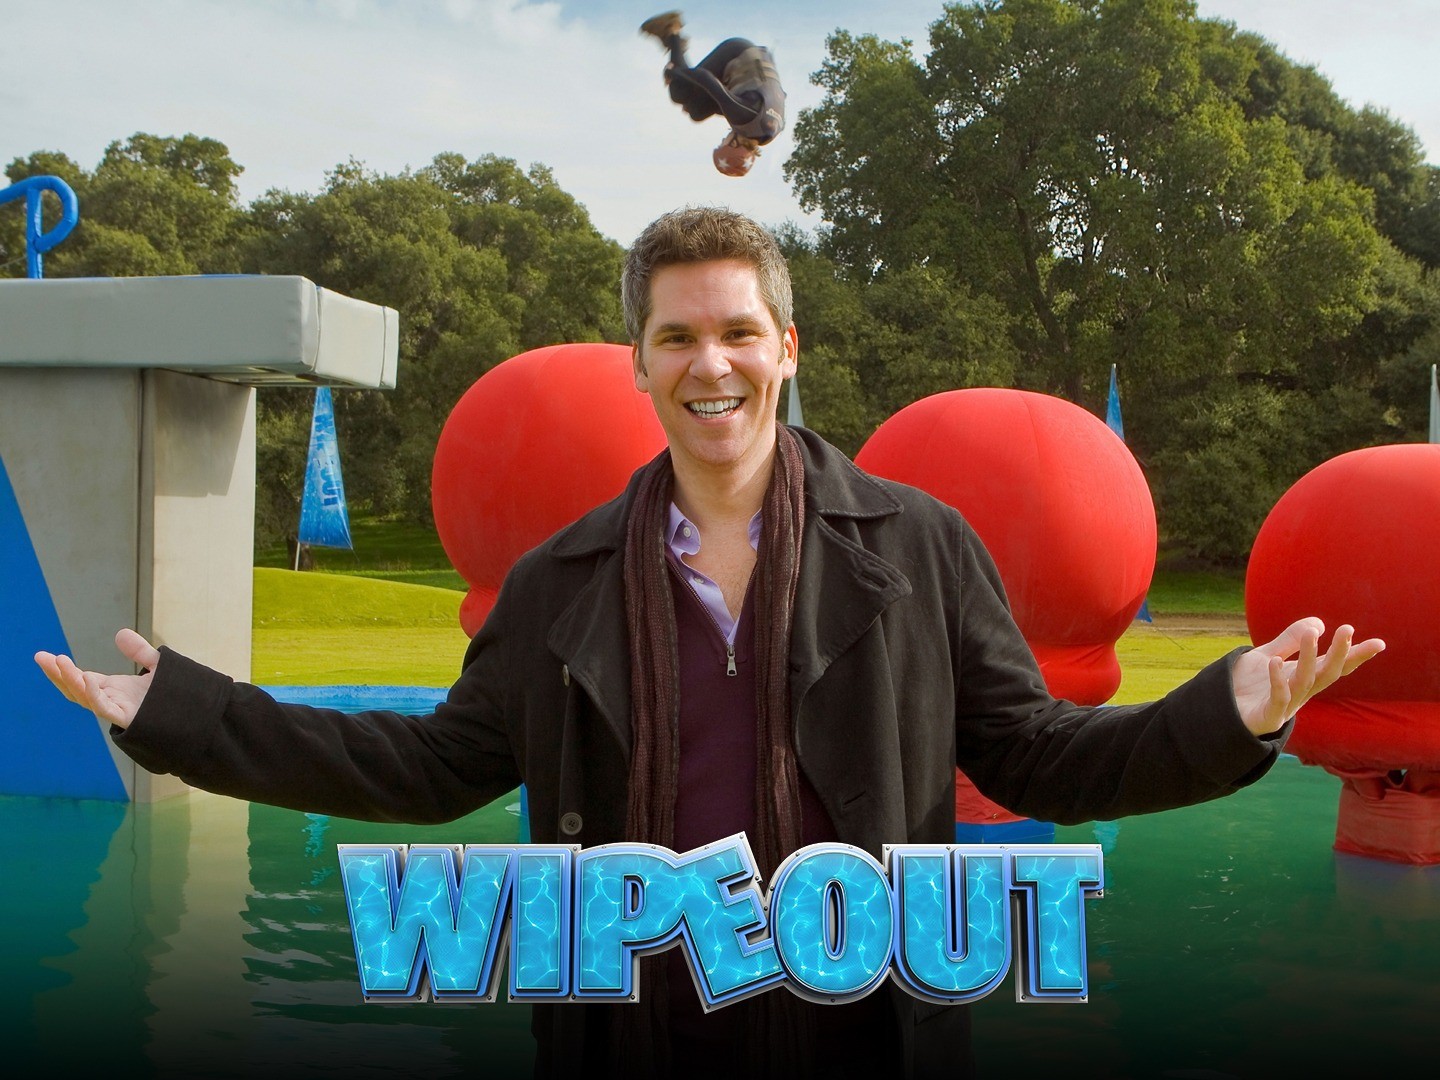 Wipeout review: Wipeout - CNET